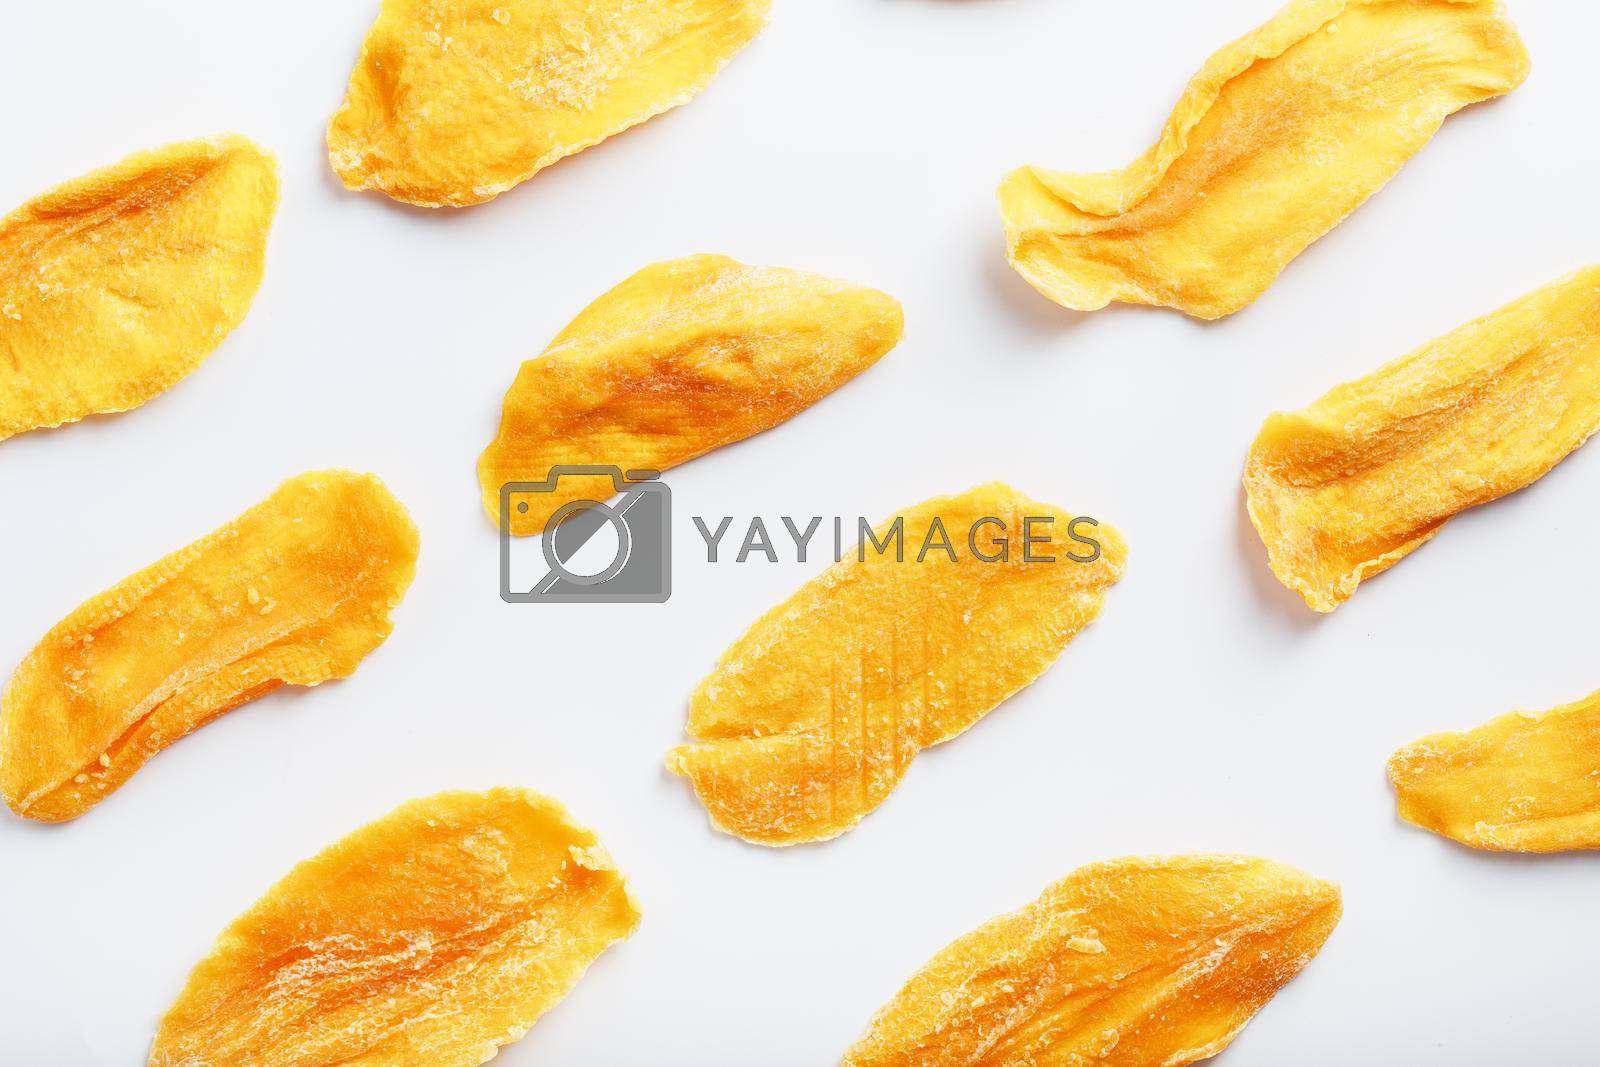 Royalty free image of Dried fruit slices from organic ripe mango by AlexGrec